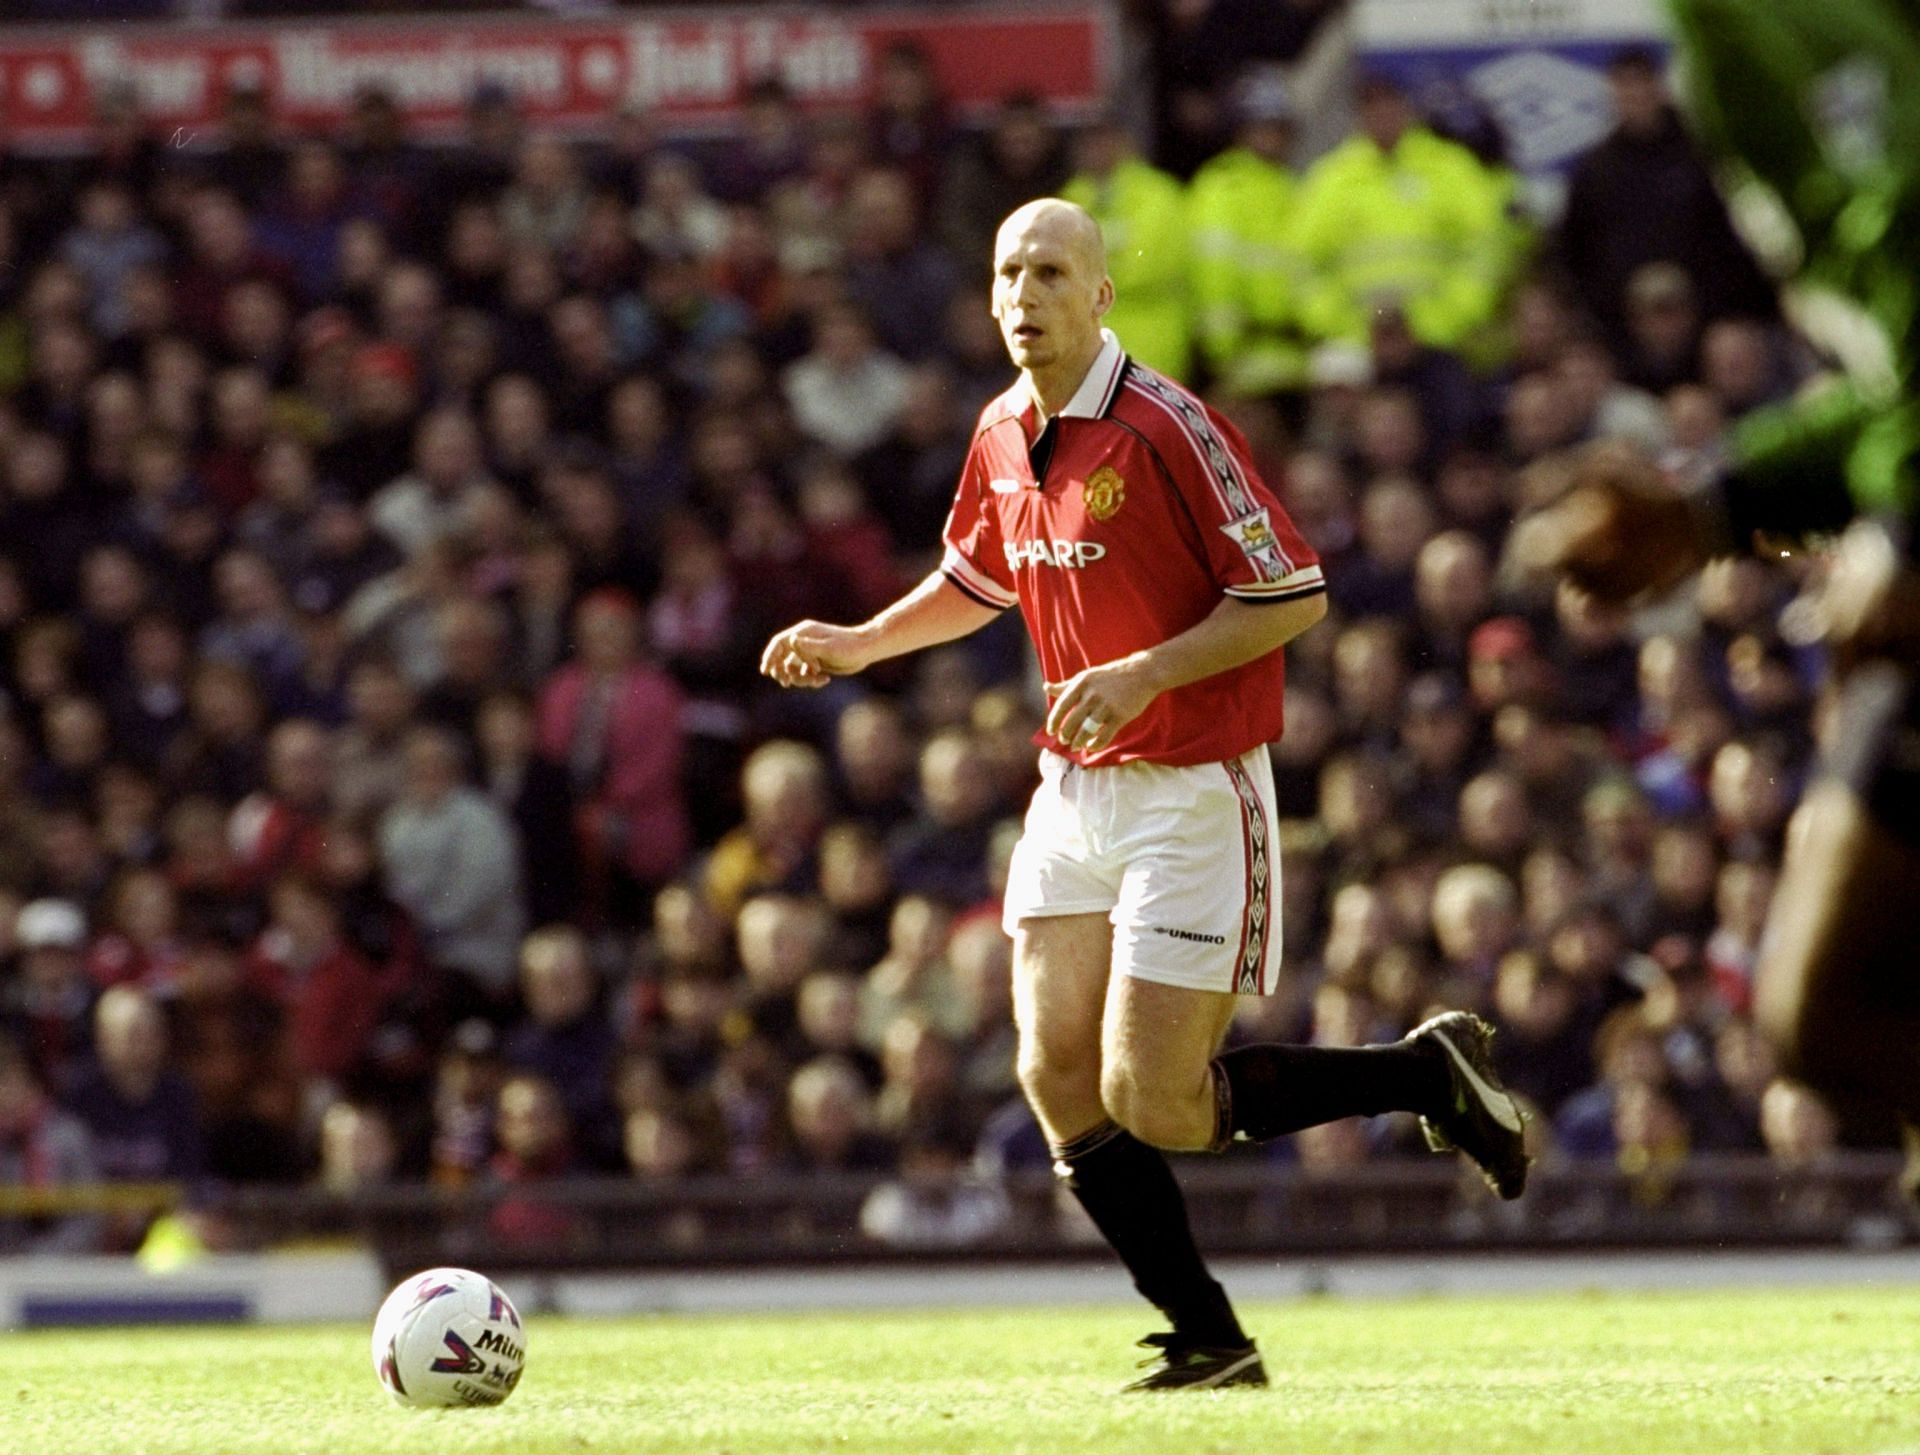 Jaap Stam had a successful stint with Manchester United.